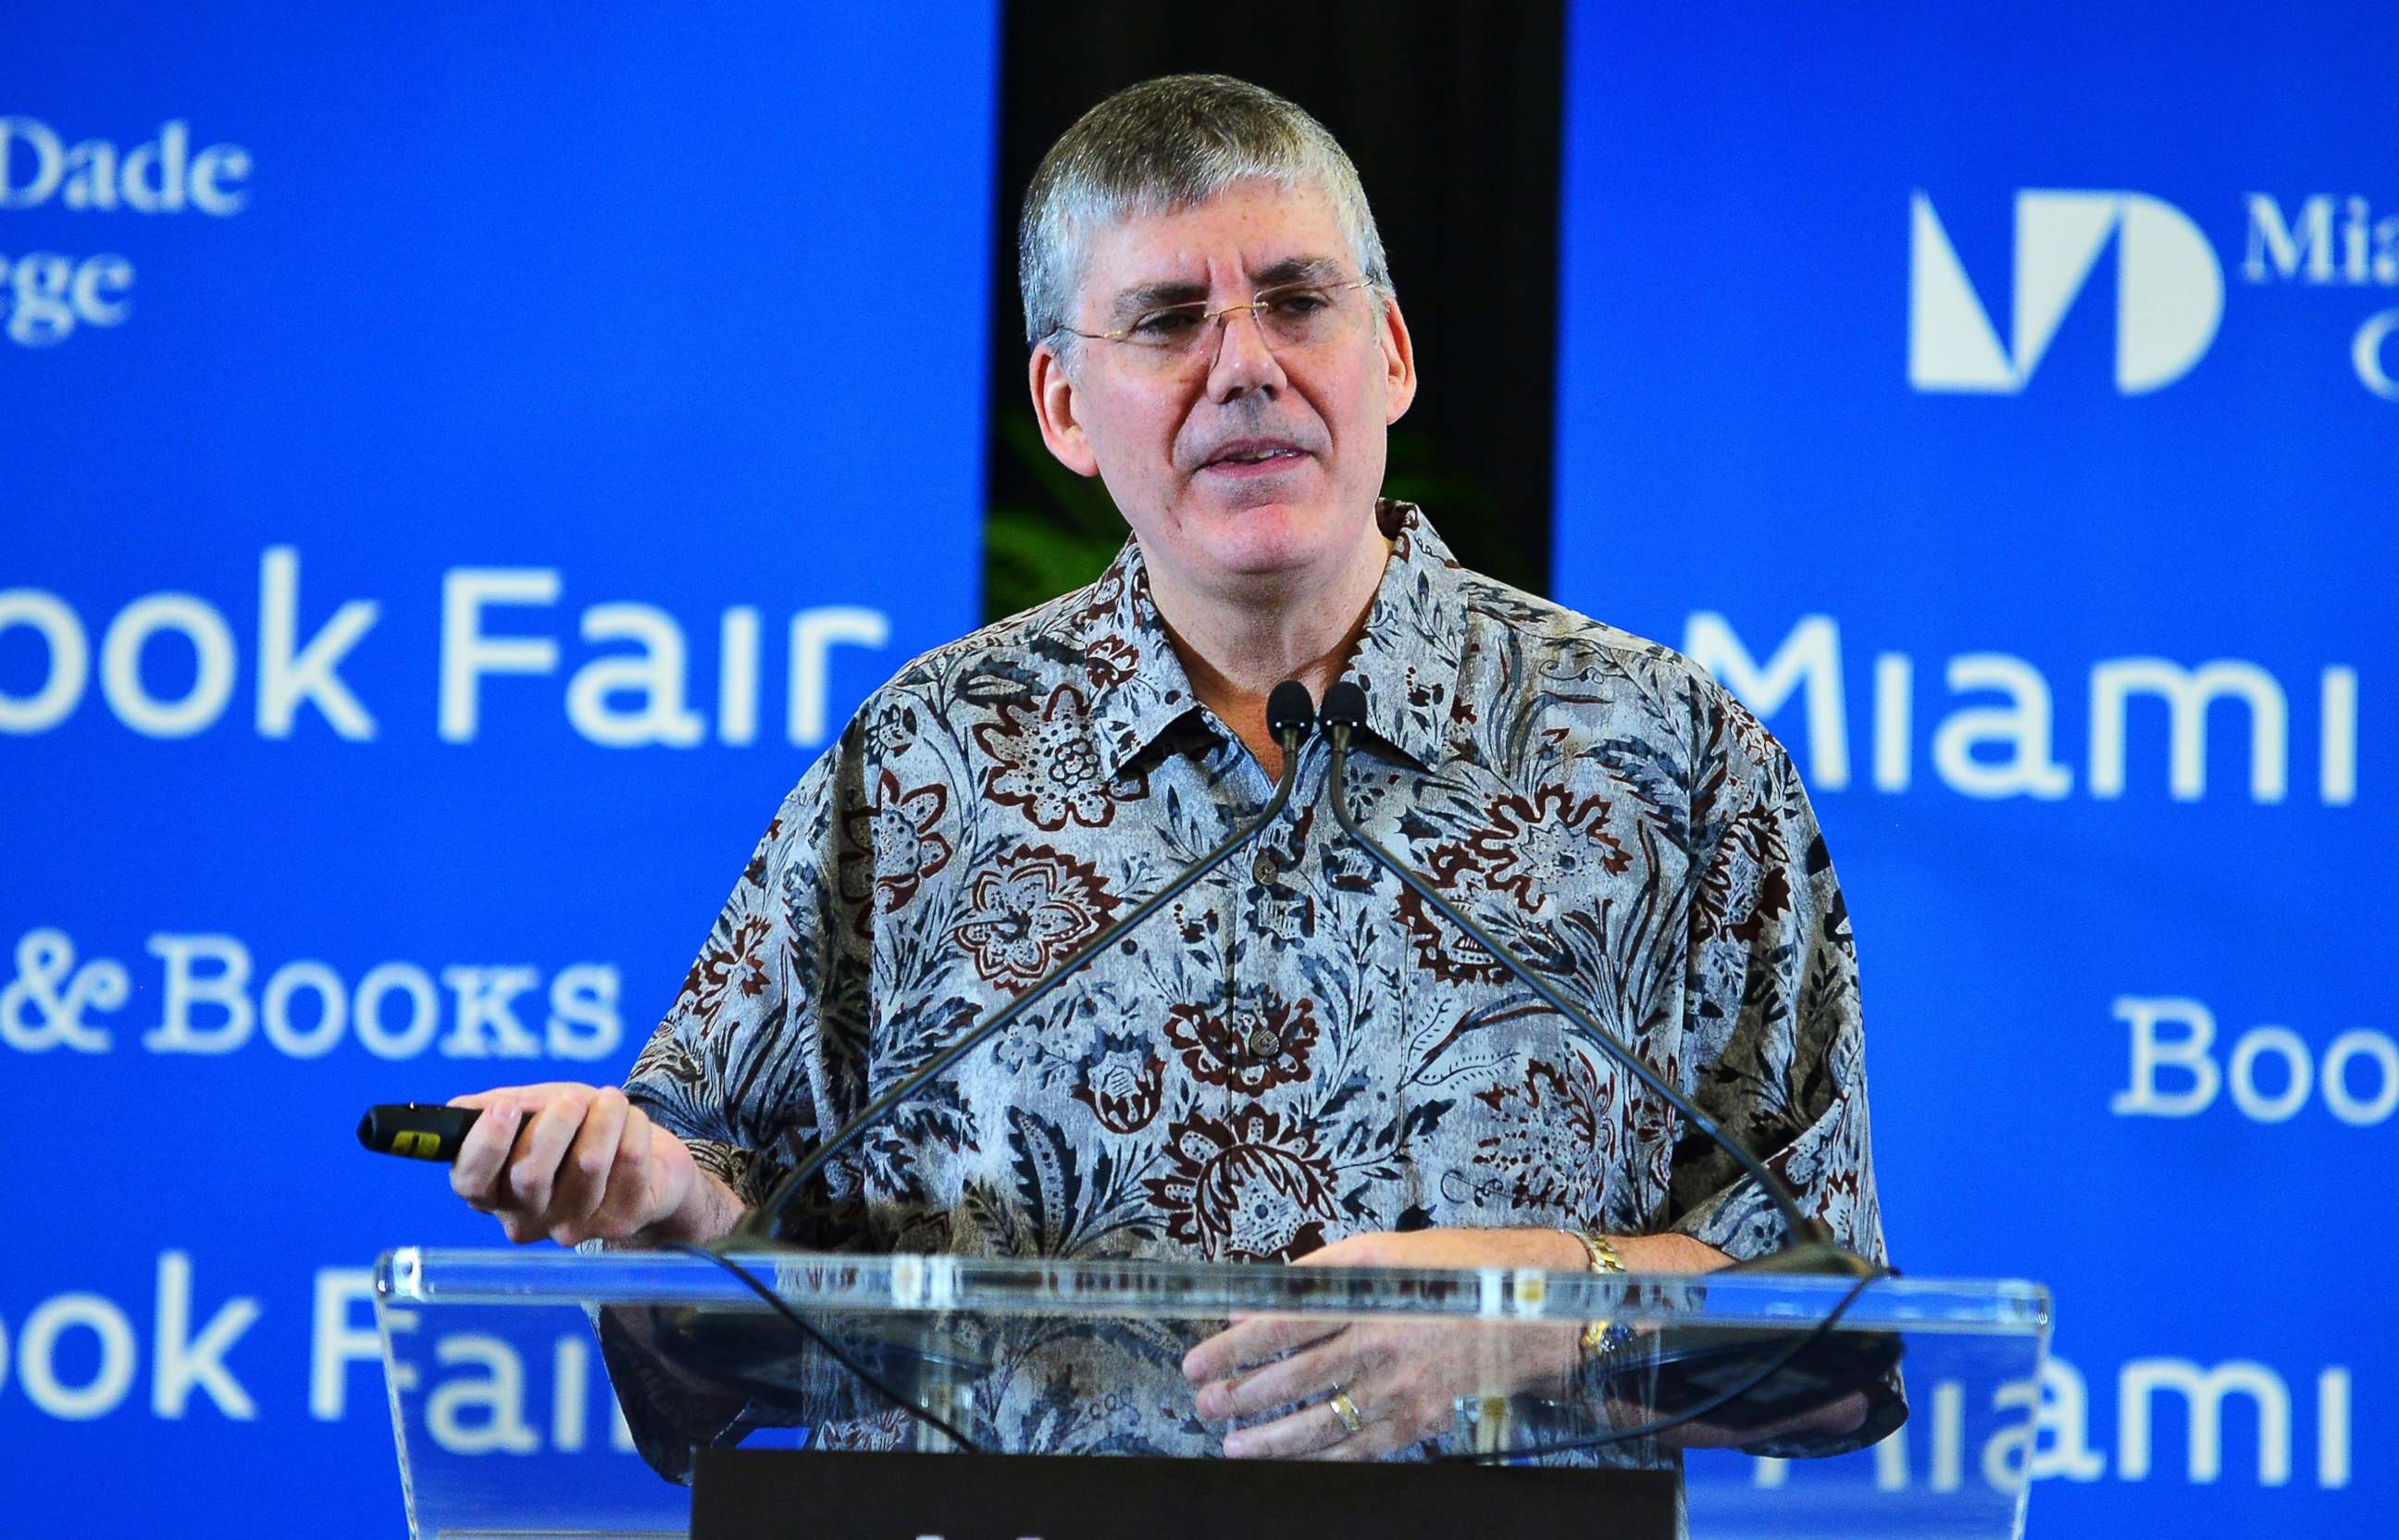 PHOTO: Author Rick Riordan speaks at Miami Dade College Chapman Conference Center on Oct. 10, 2015 in Miami, Fla.